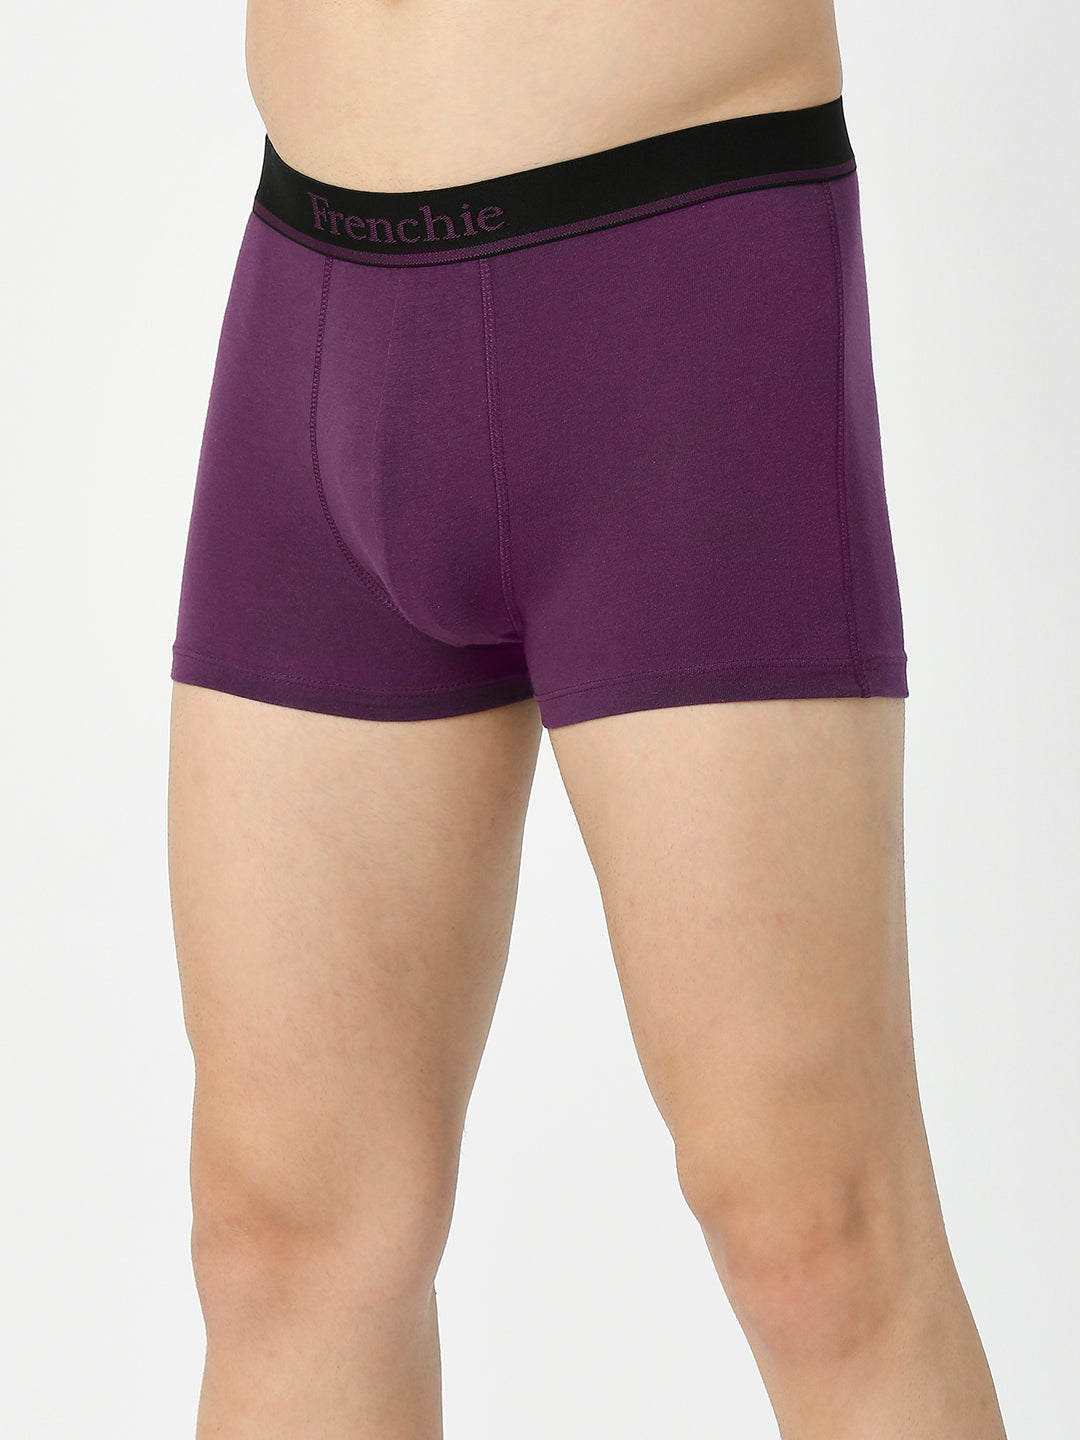 Frenchie Men's Trunk Elements-Assorted Colours